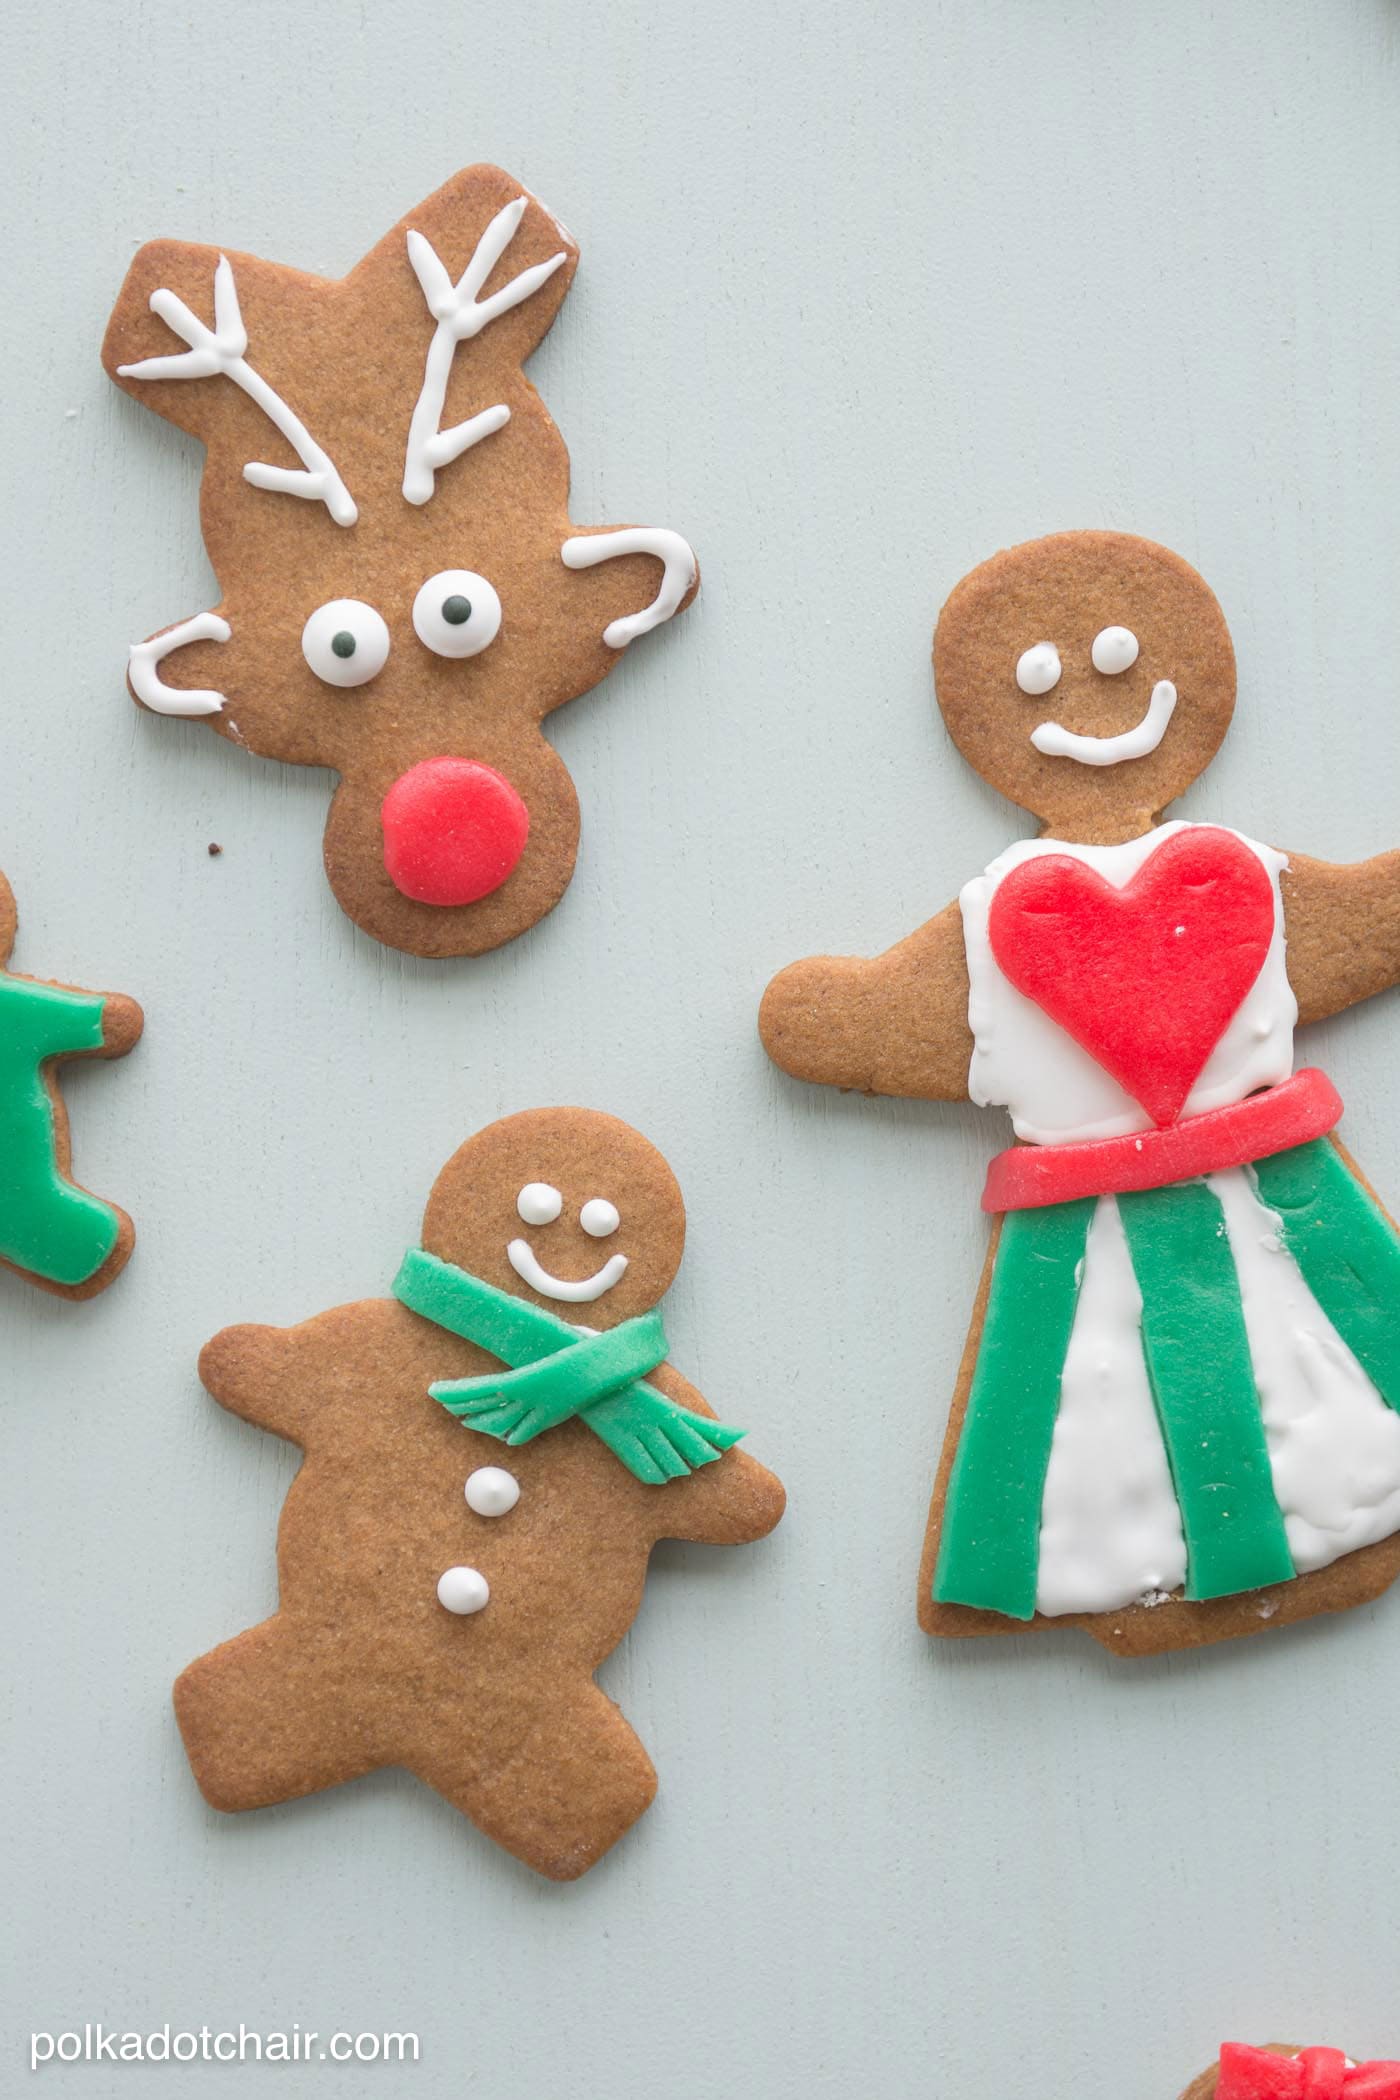 Christmas Gingerbread Cookie Decorating Ideas, use Airheads candy to cut out "clothes" and accessories for your gingerbread men